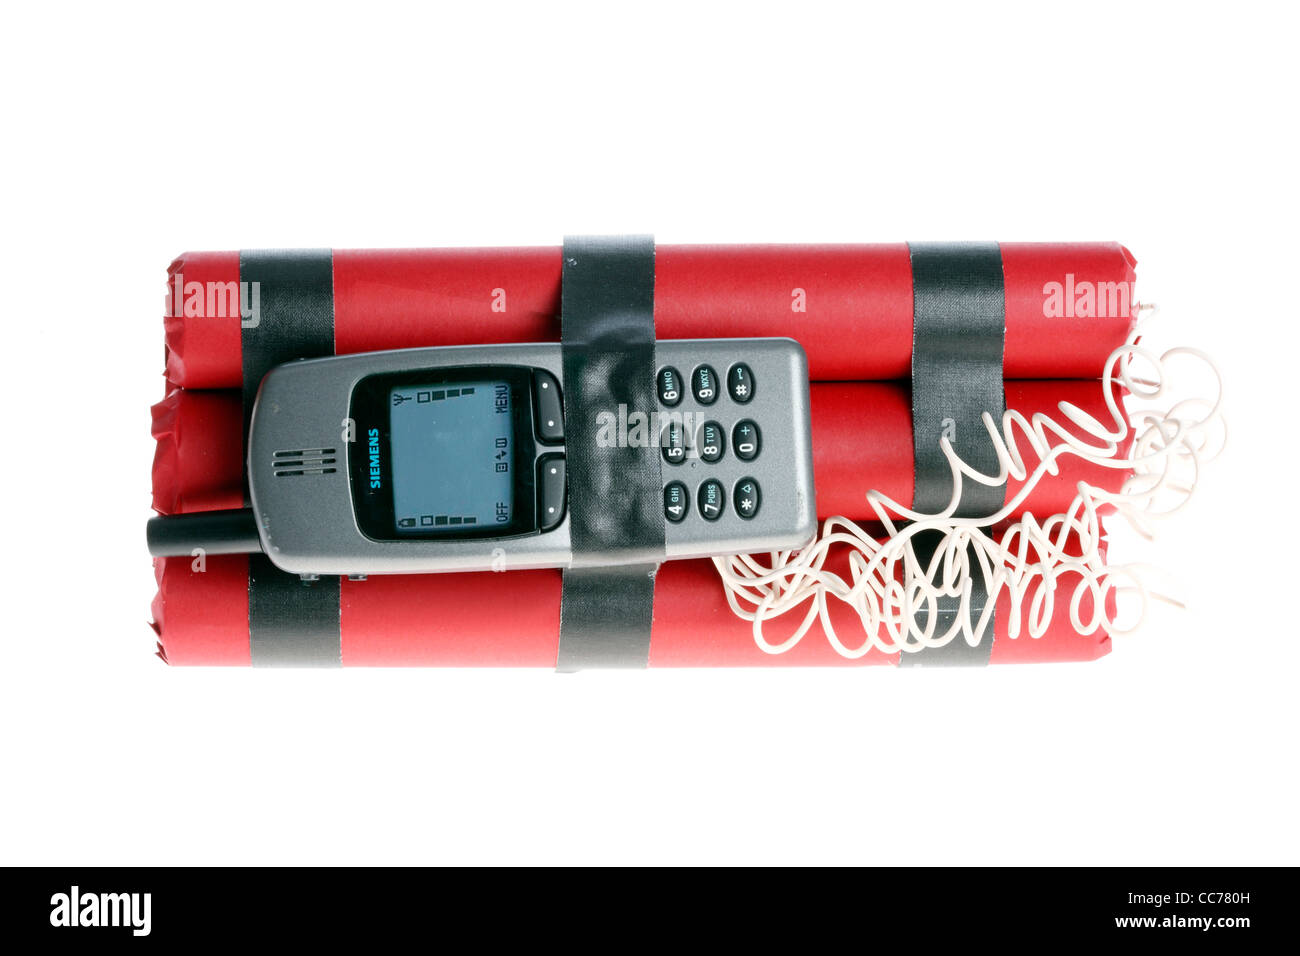 Symbol picture, time bomb. Bomb remote controlled explosive device, released by a mobile phone, timer or incoming call. Stock Photo